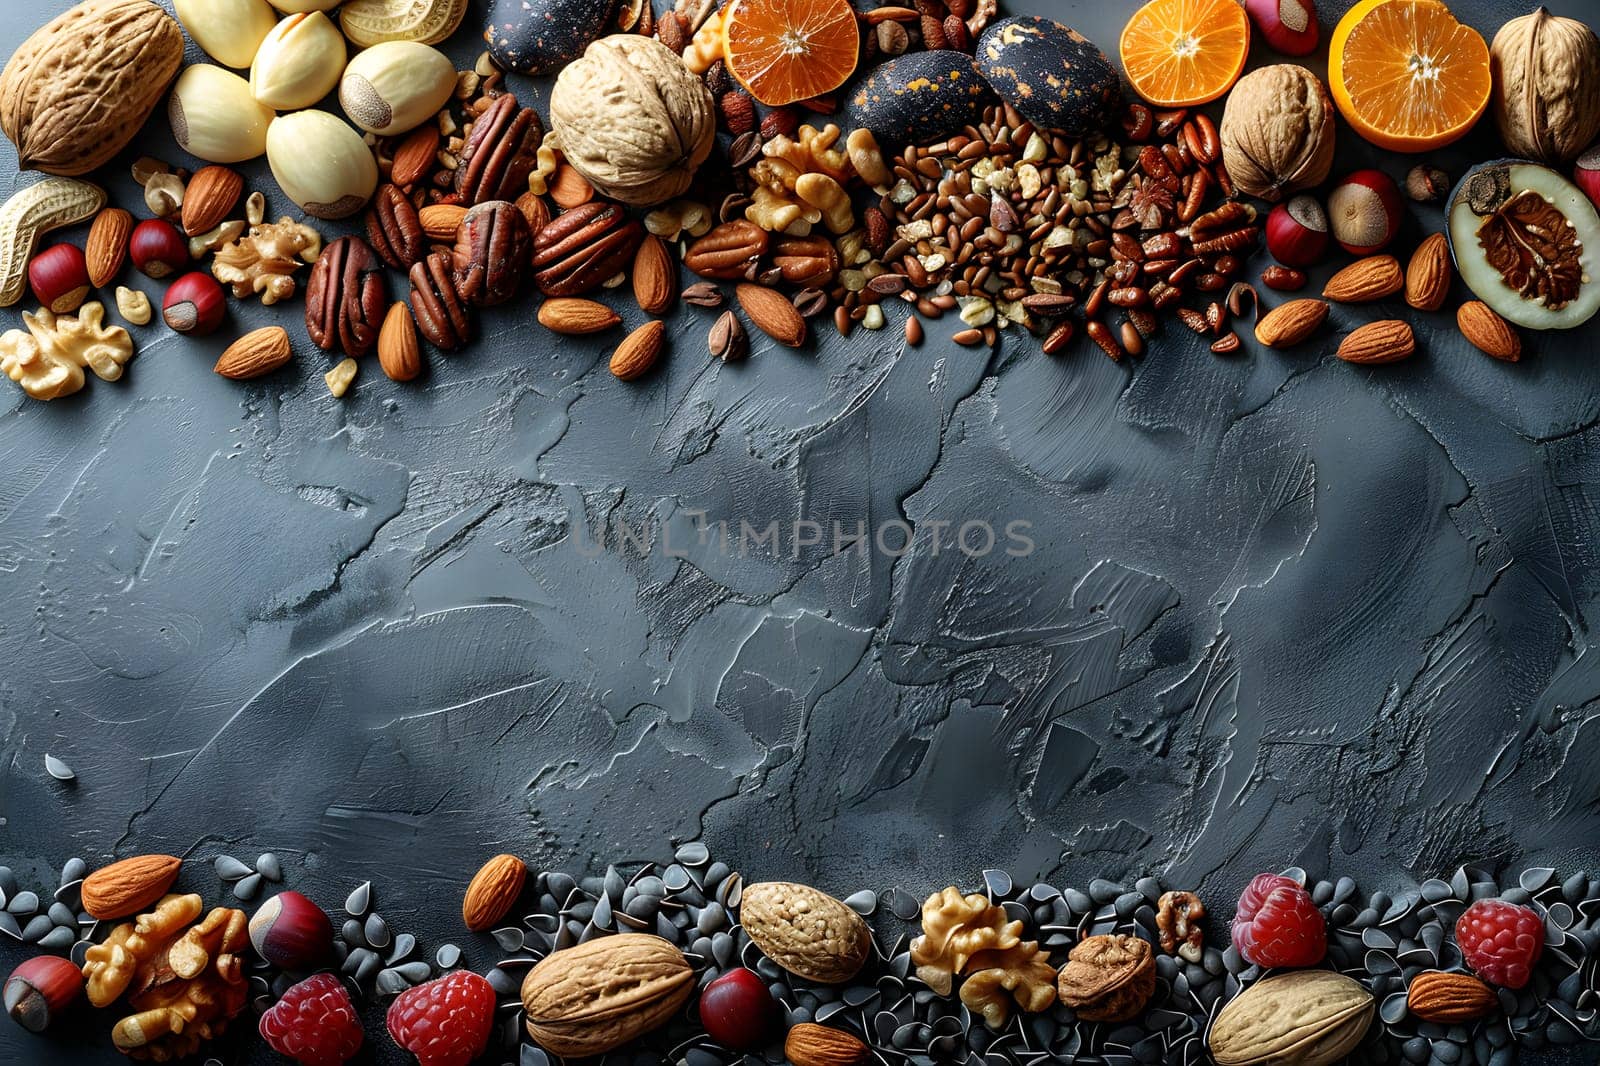 A variety of natural foods including nuts and fruits are displayed on the table, ready to be used as ingredients in delicious dishes or enjoyed as a nutritious snack